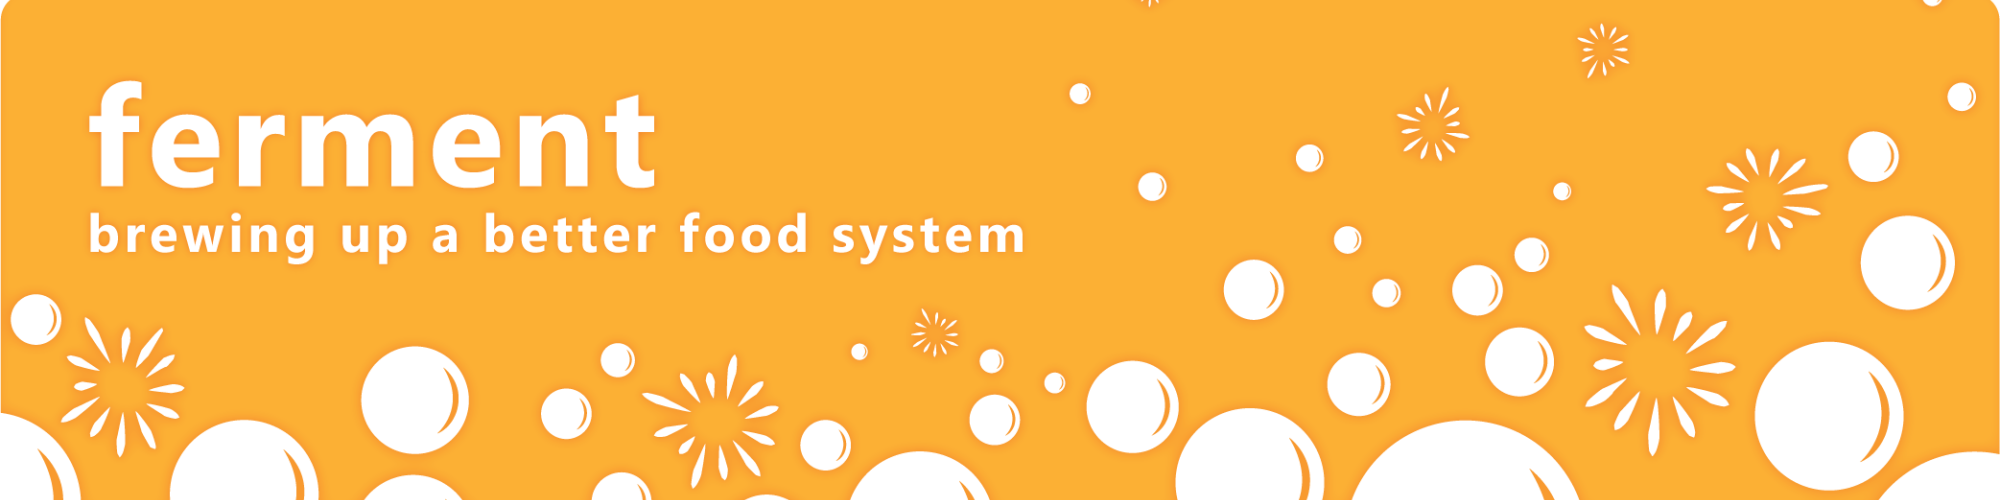 The banner for "Ferment" the community platform of TABLE, with the tagline "brewing up a better food system". The background is bright orange with white bubbles rising and popping.